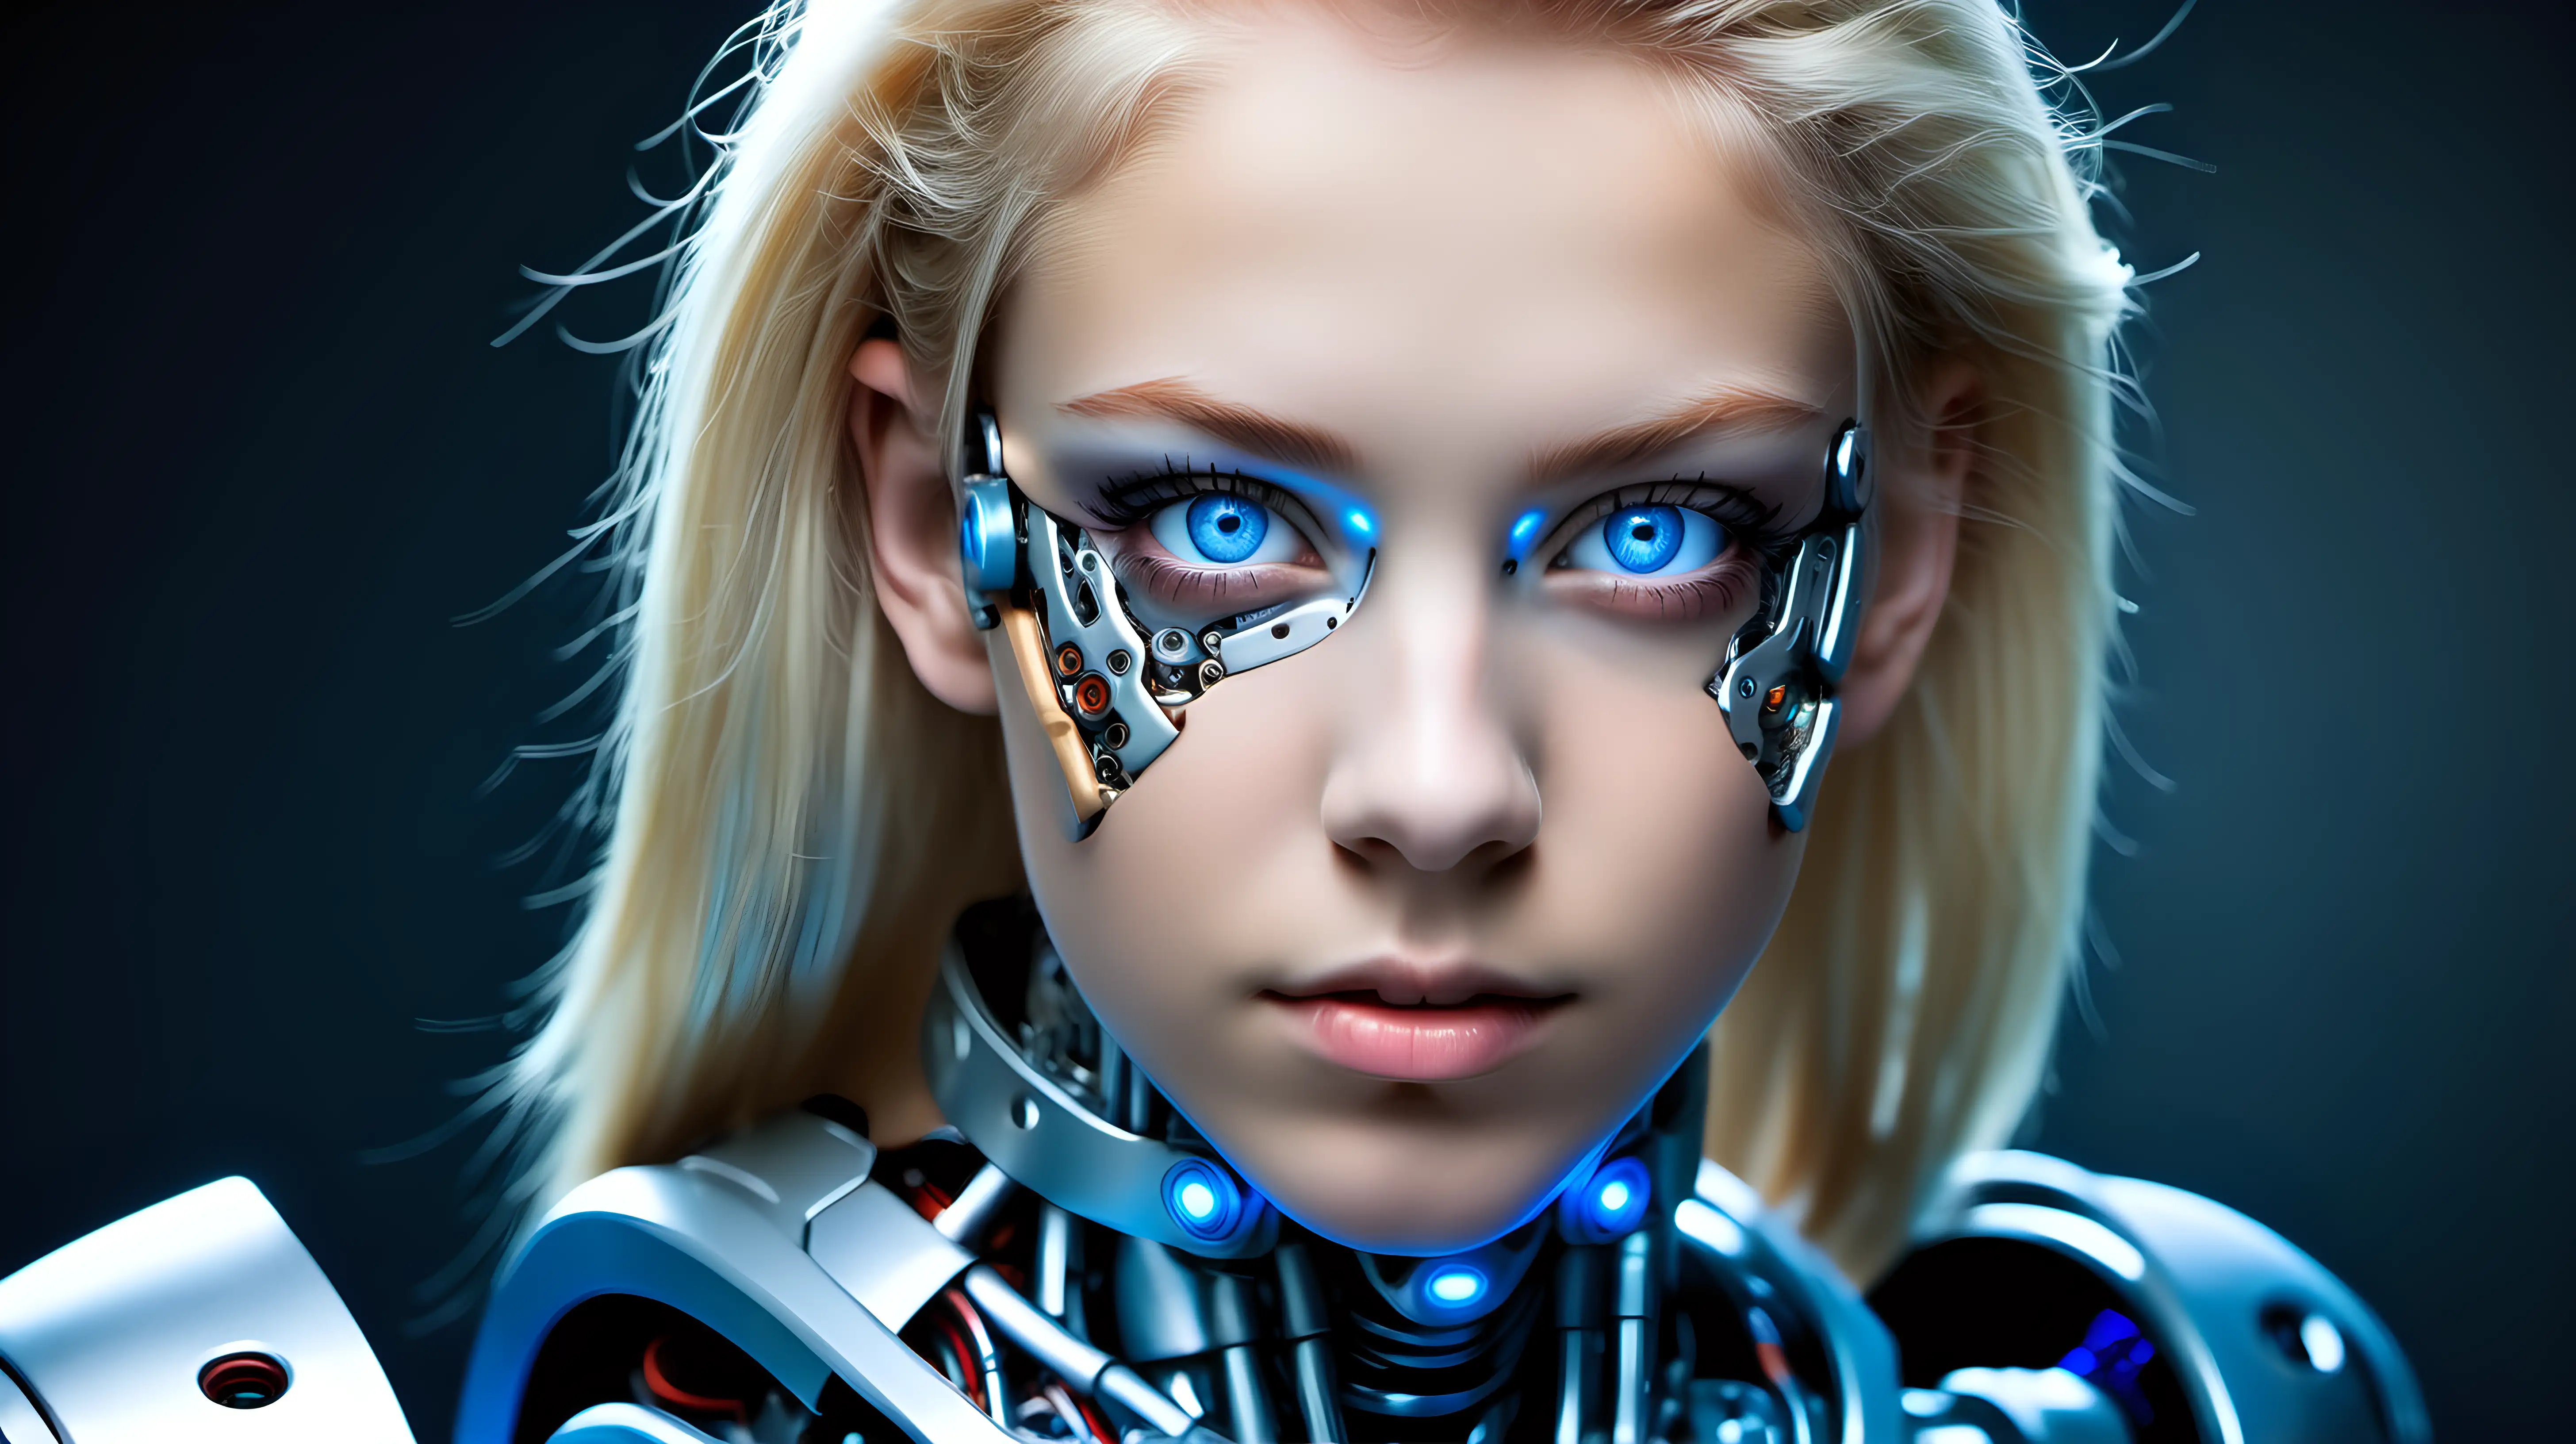 Cyborg woman, 18 years old. She has a cyborg face, but she is extremely beautiful. Blonde. Blue eyes. Photo realistic. Portrait lens. The image is as if made with Canon EF 85mm f/1.8 USM lens.